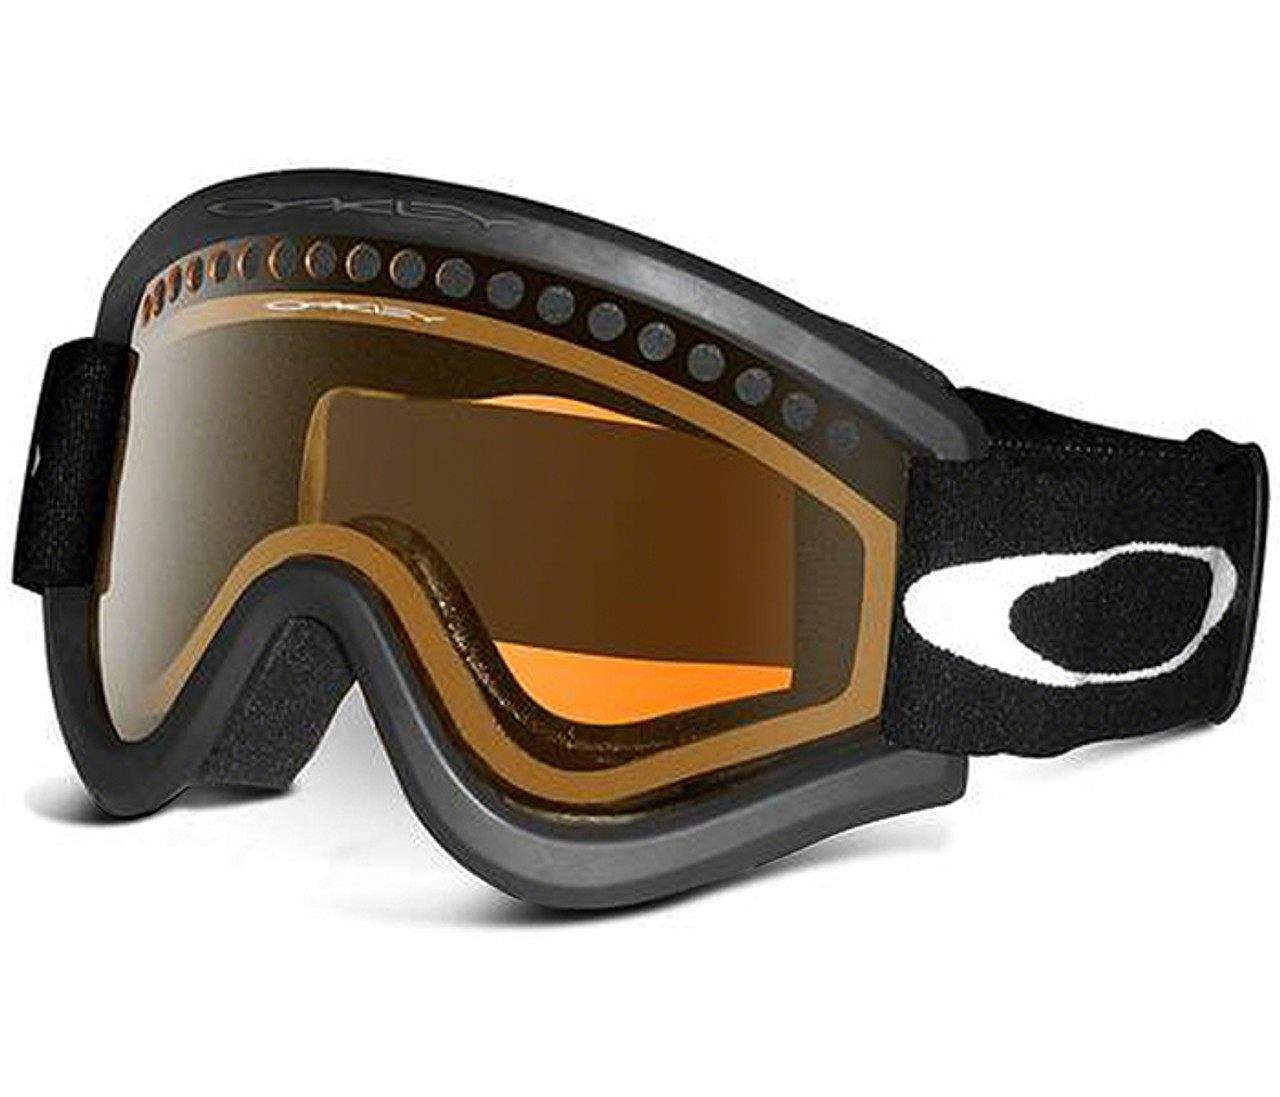 Oakley Goggles & Outerwear 2016-2017 Preview - I